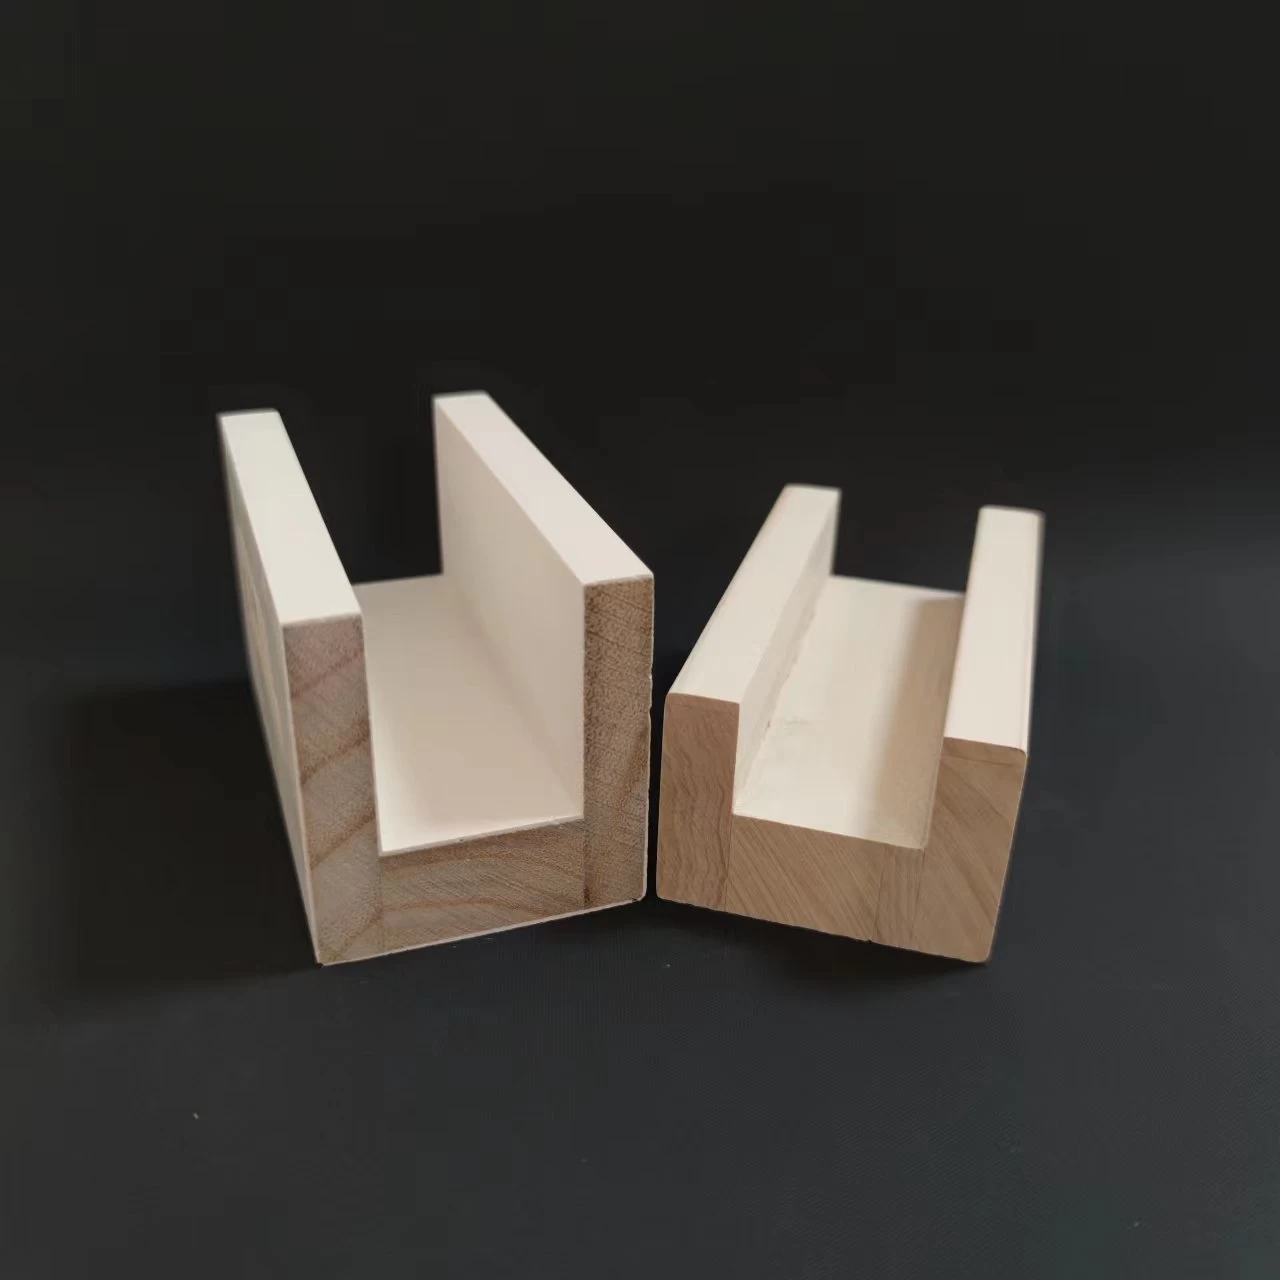 China Wooden Components manufacturer, Wooden Components Supplier, Wooden Components Factory